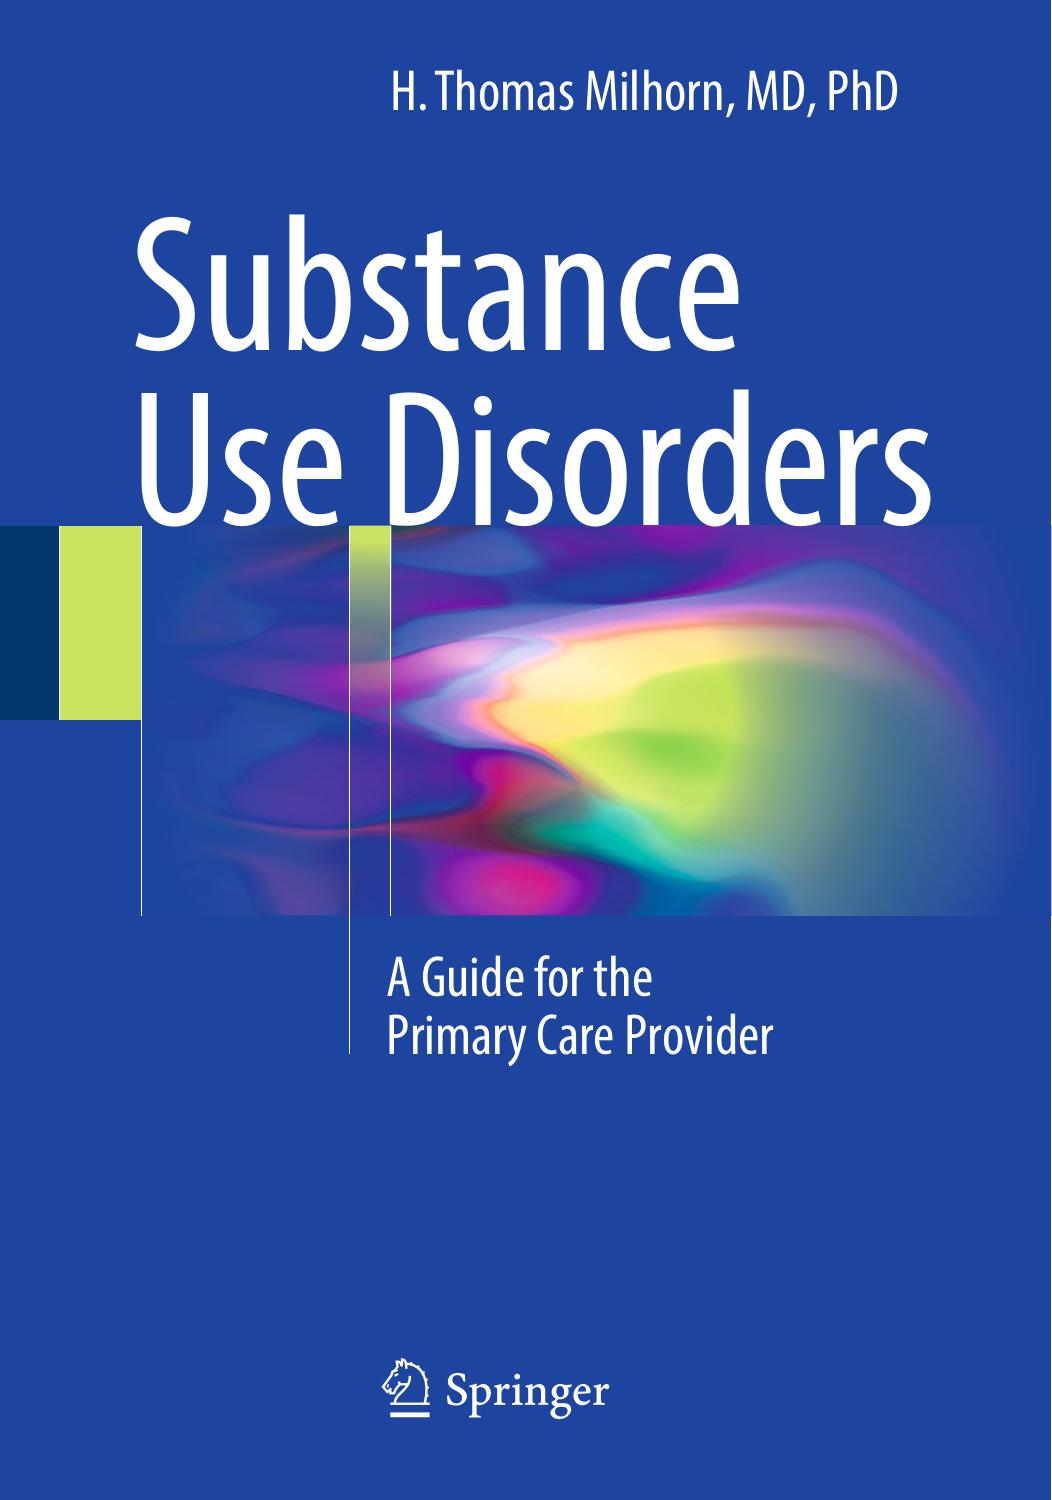 52 Substance Use Disorders  A Guide for the Primary Care Provider 2018